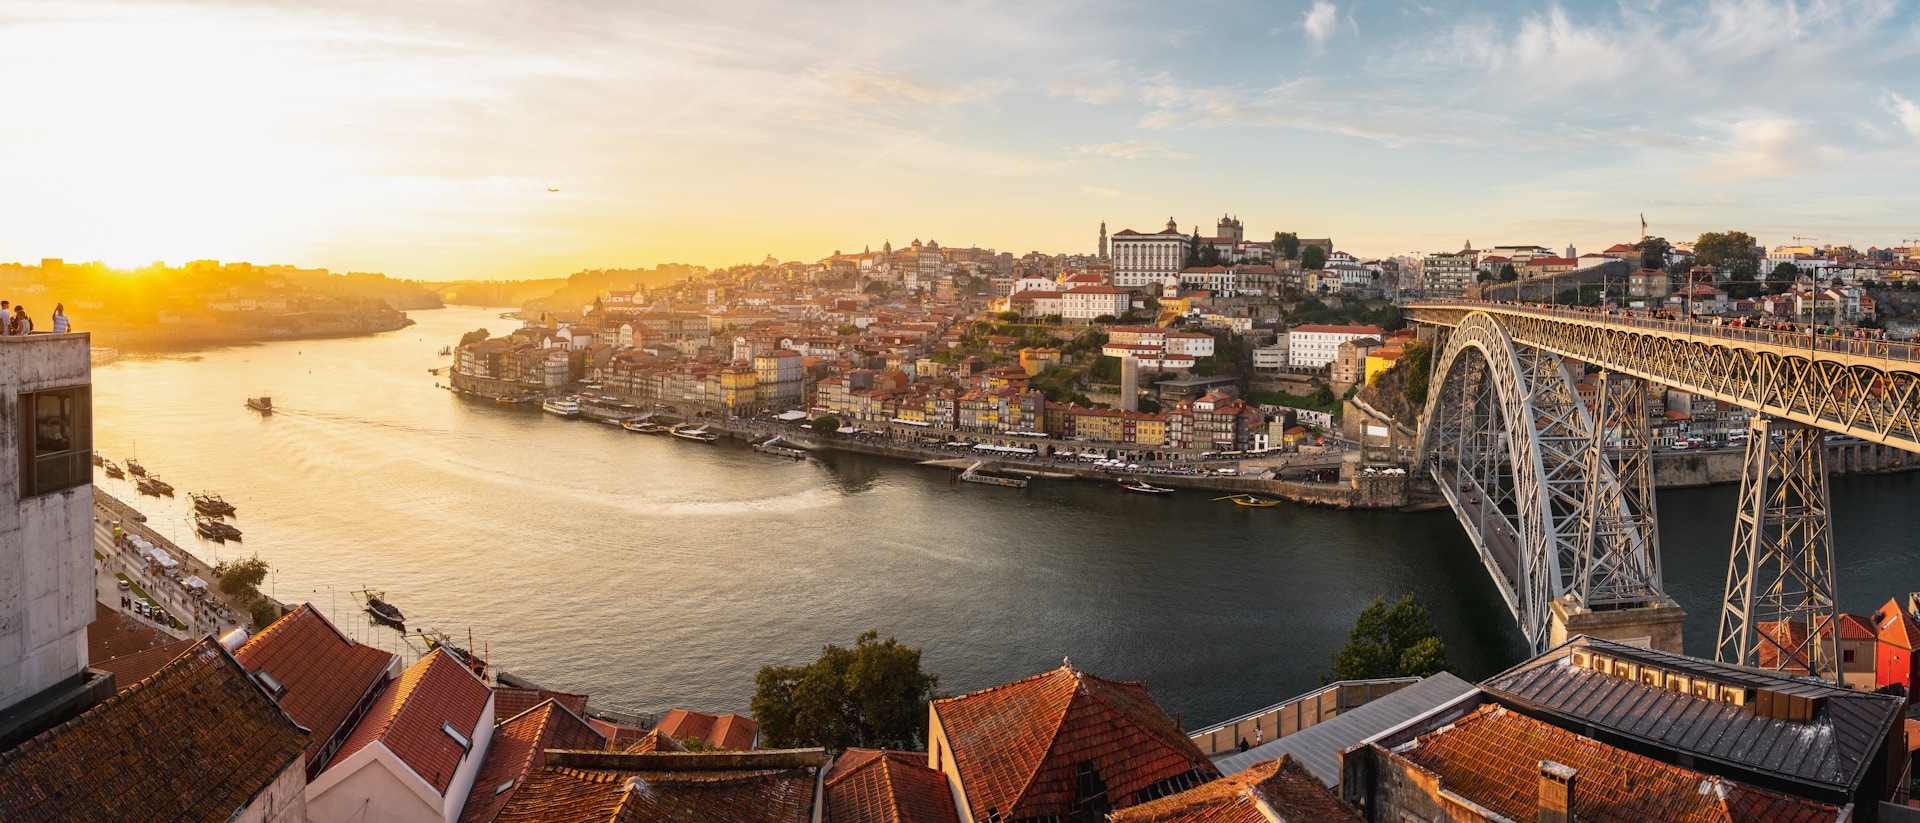 Activities and things to do in Porto